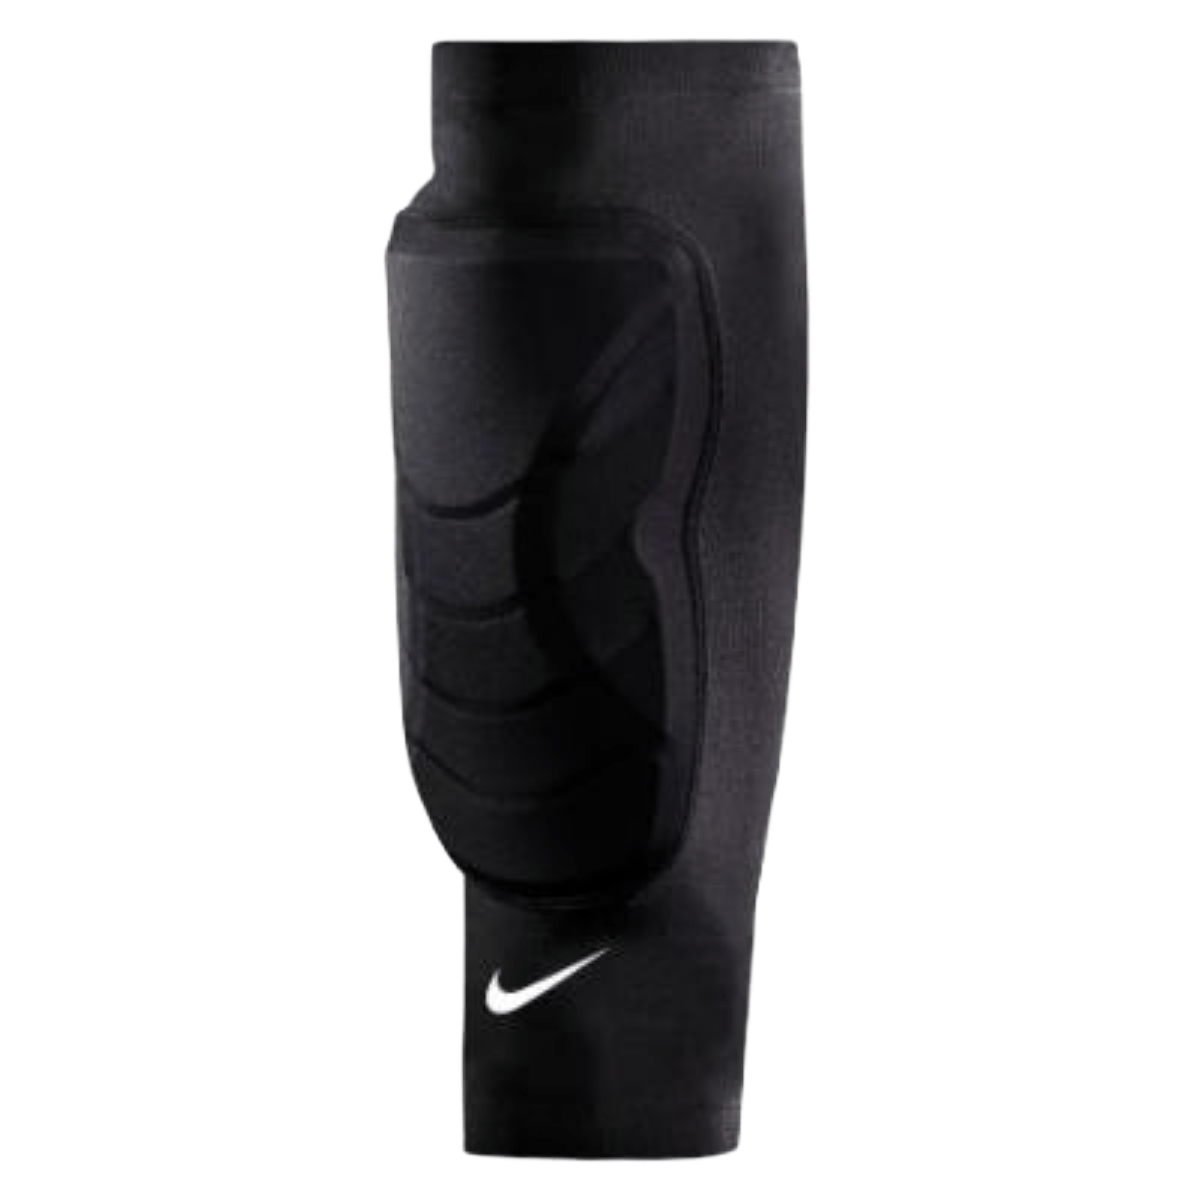 Nike Hyperstrong Padded Shin Sleeve - Als.com